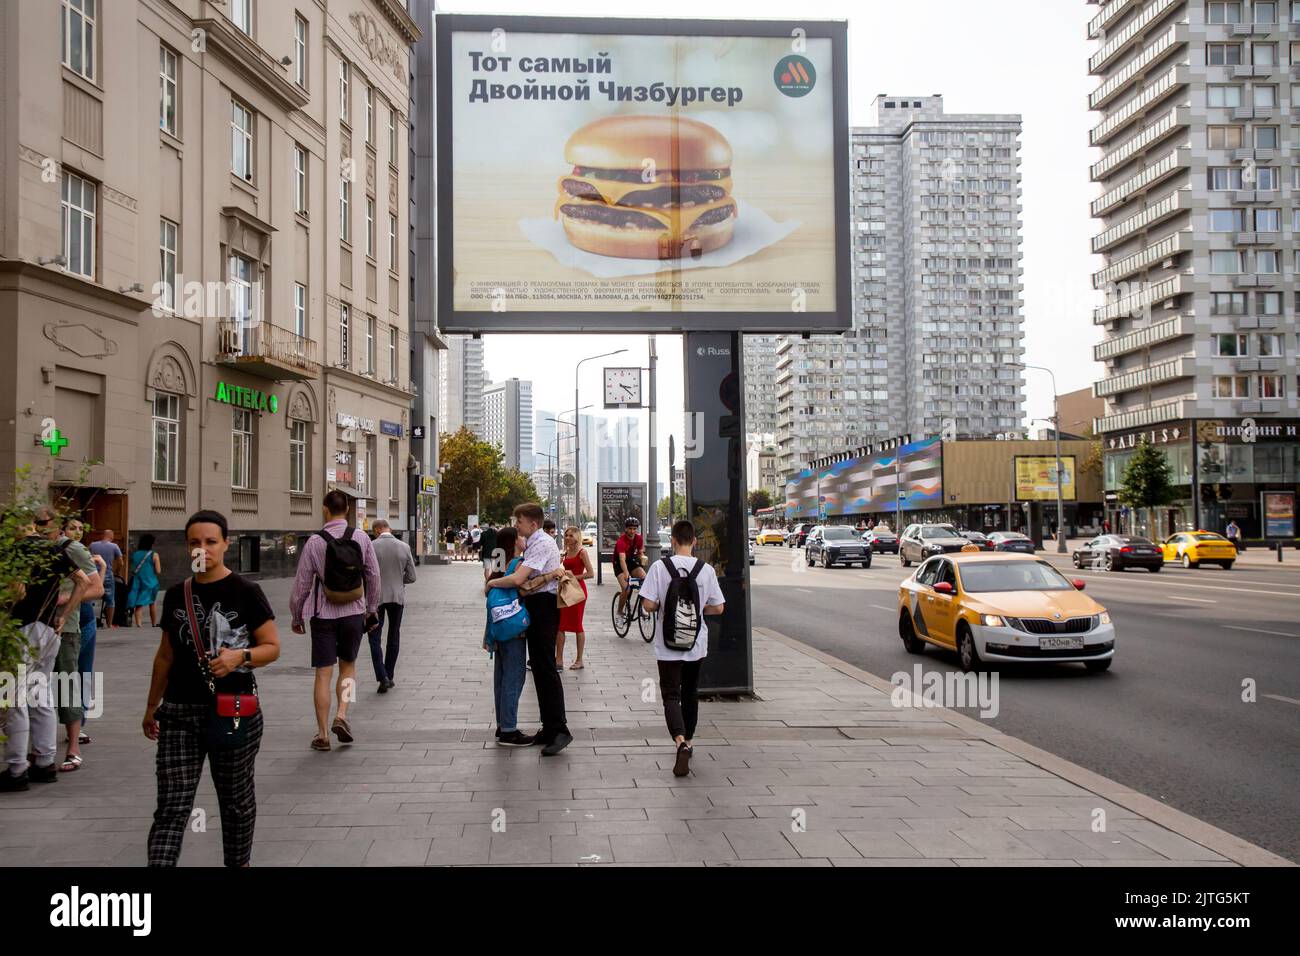 Moscow, Russia. 19th of August, 2022. An advertising banner of the 'Vkusno i tochka' (Eng: Delicious and that's it!) fast food restaurants based on McDonald's is seen on Novy Arbat street in central Moscow, Russia. The banner reads 'The same double cheeseburger' Stock Photo